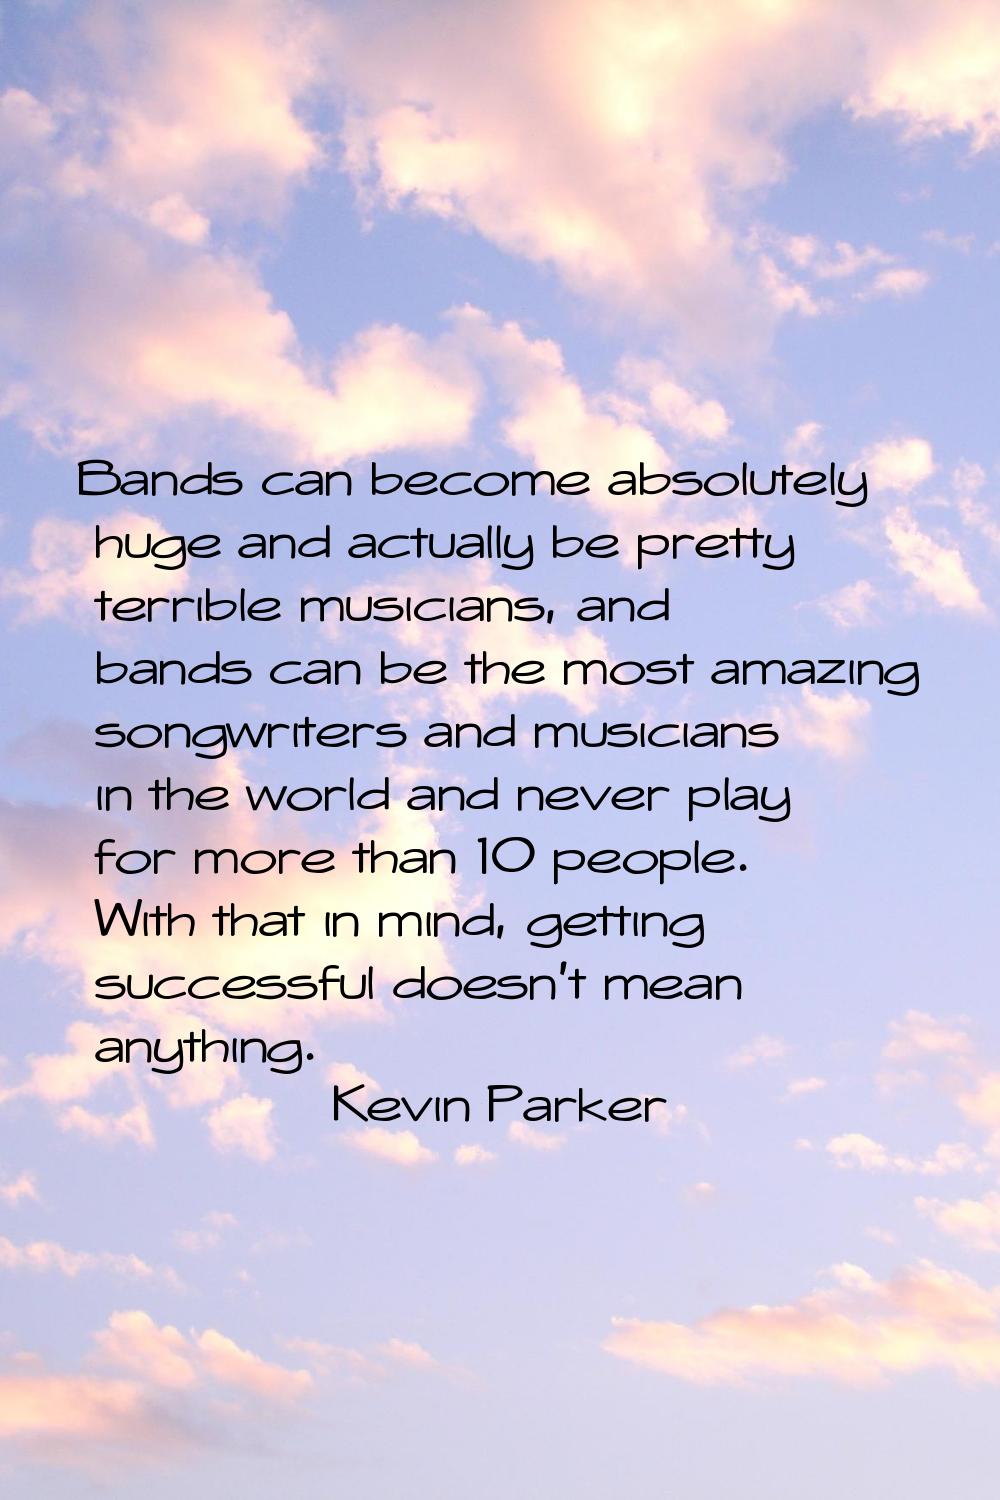 Bands can become absolutely huge and actually be pretty terrible musicians, and bands can be the mo